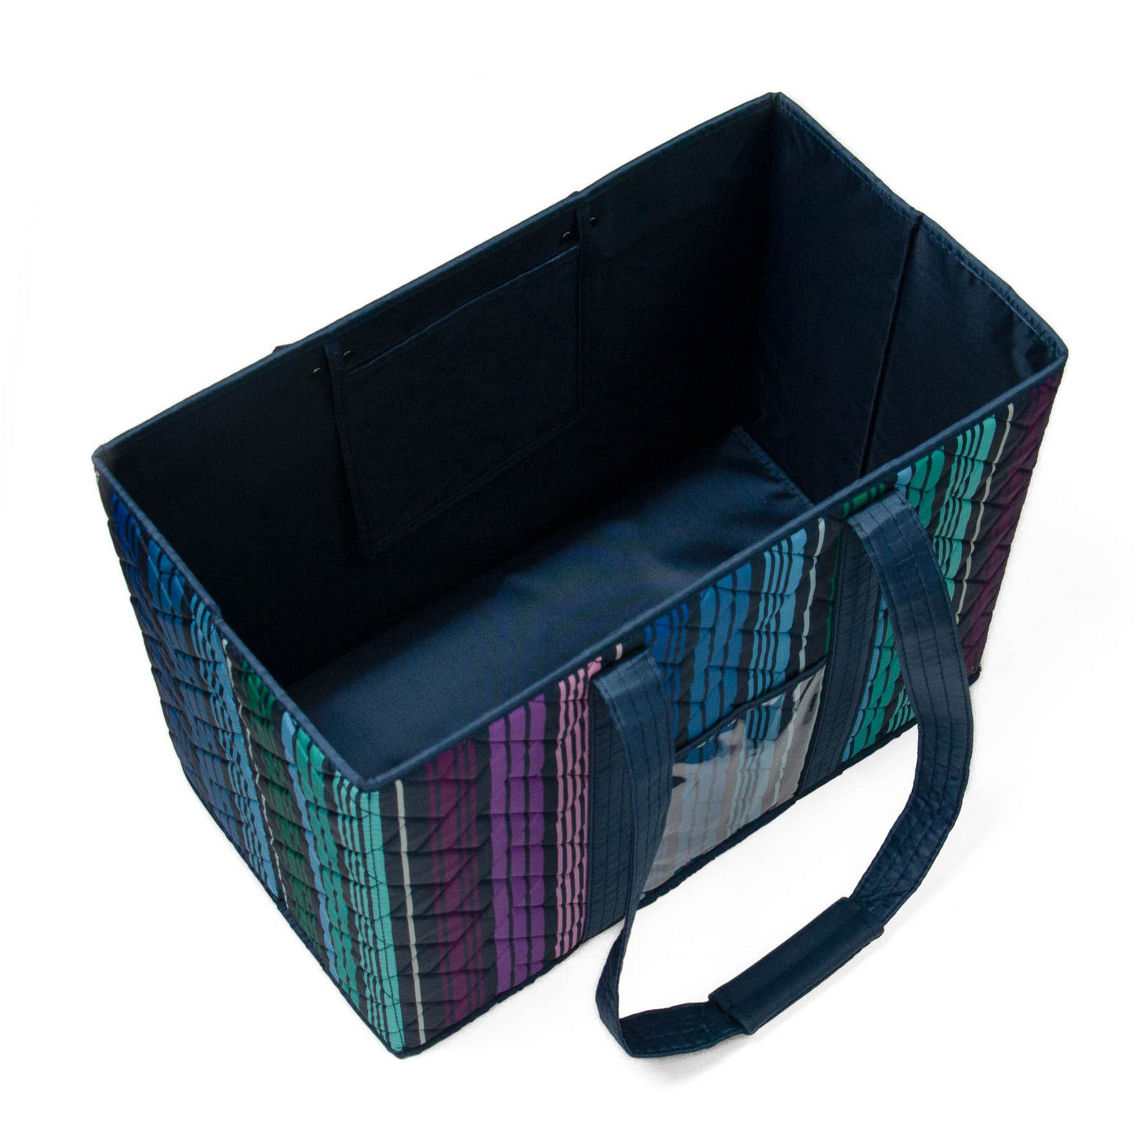 Lug Gallop XL Collapsible Carry-All Tote - Image 2 of 2